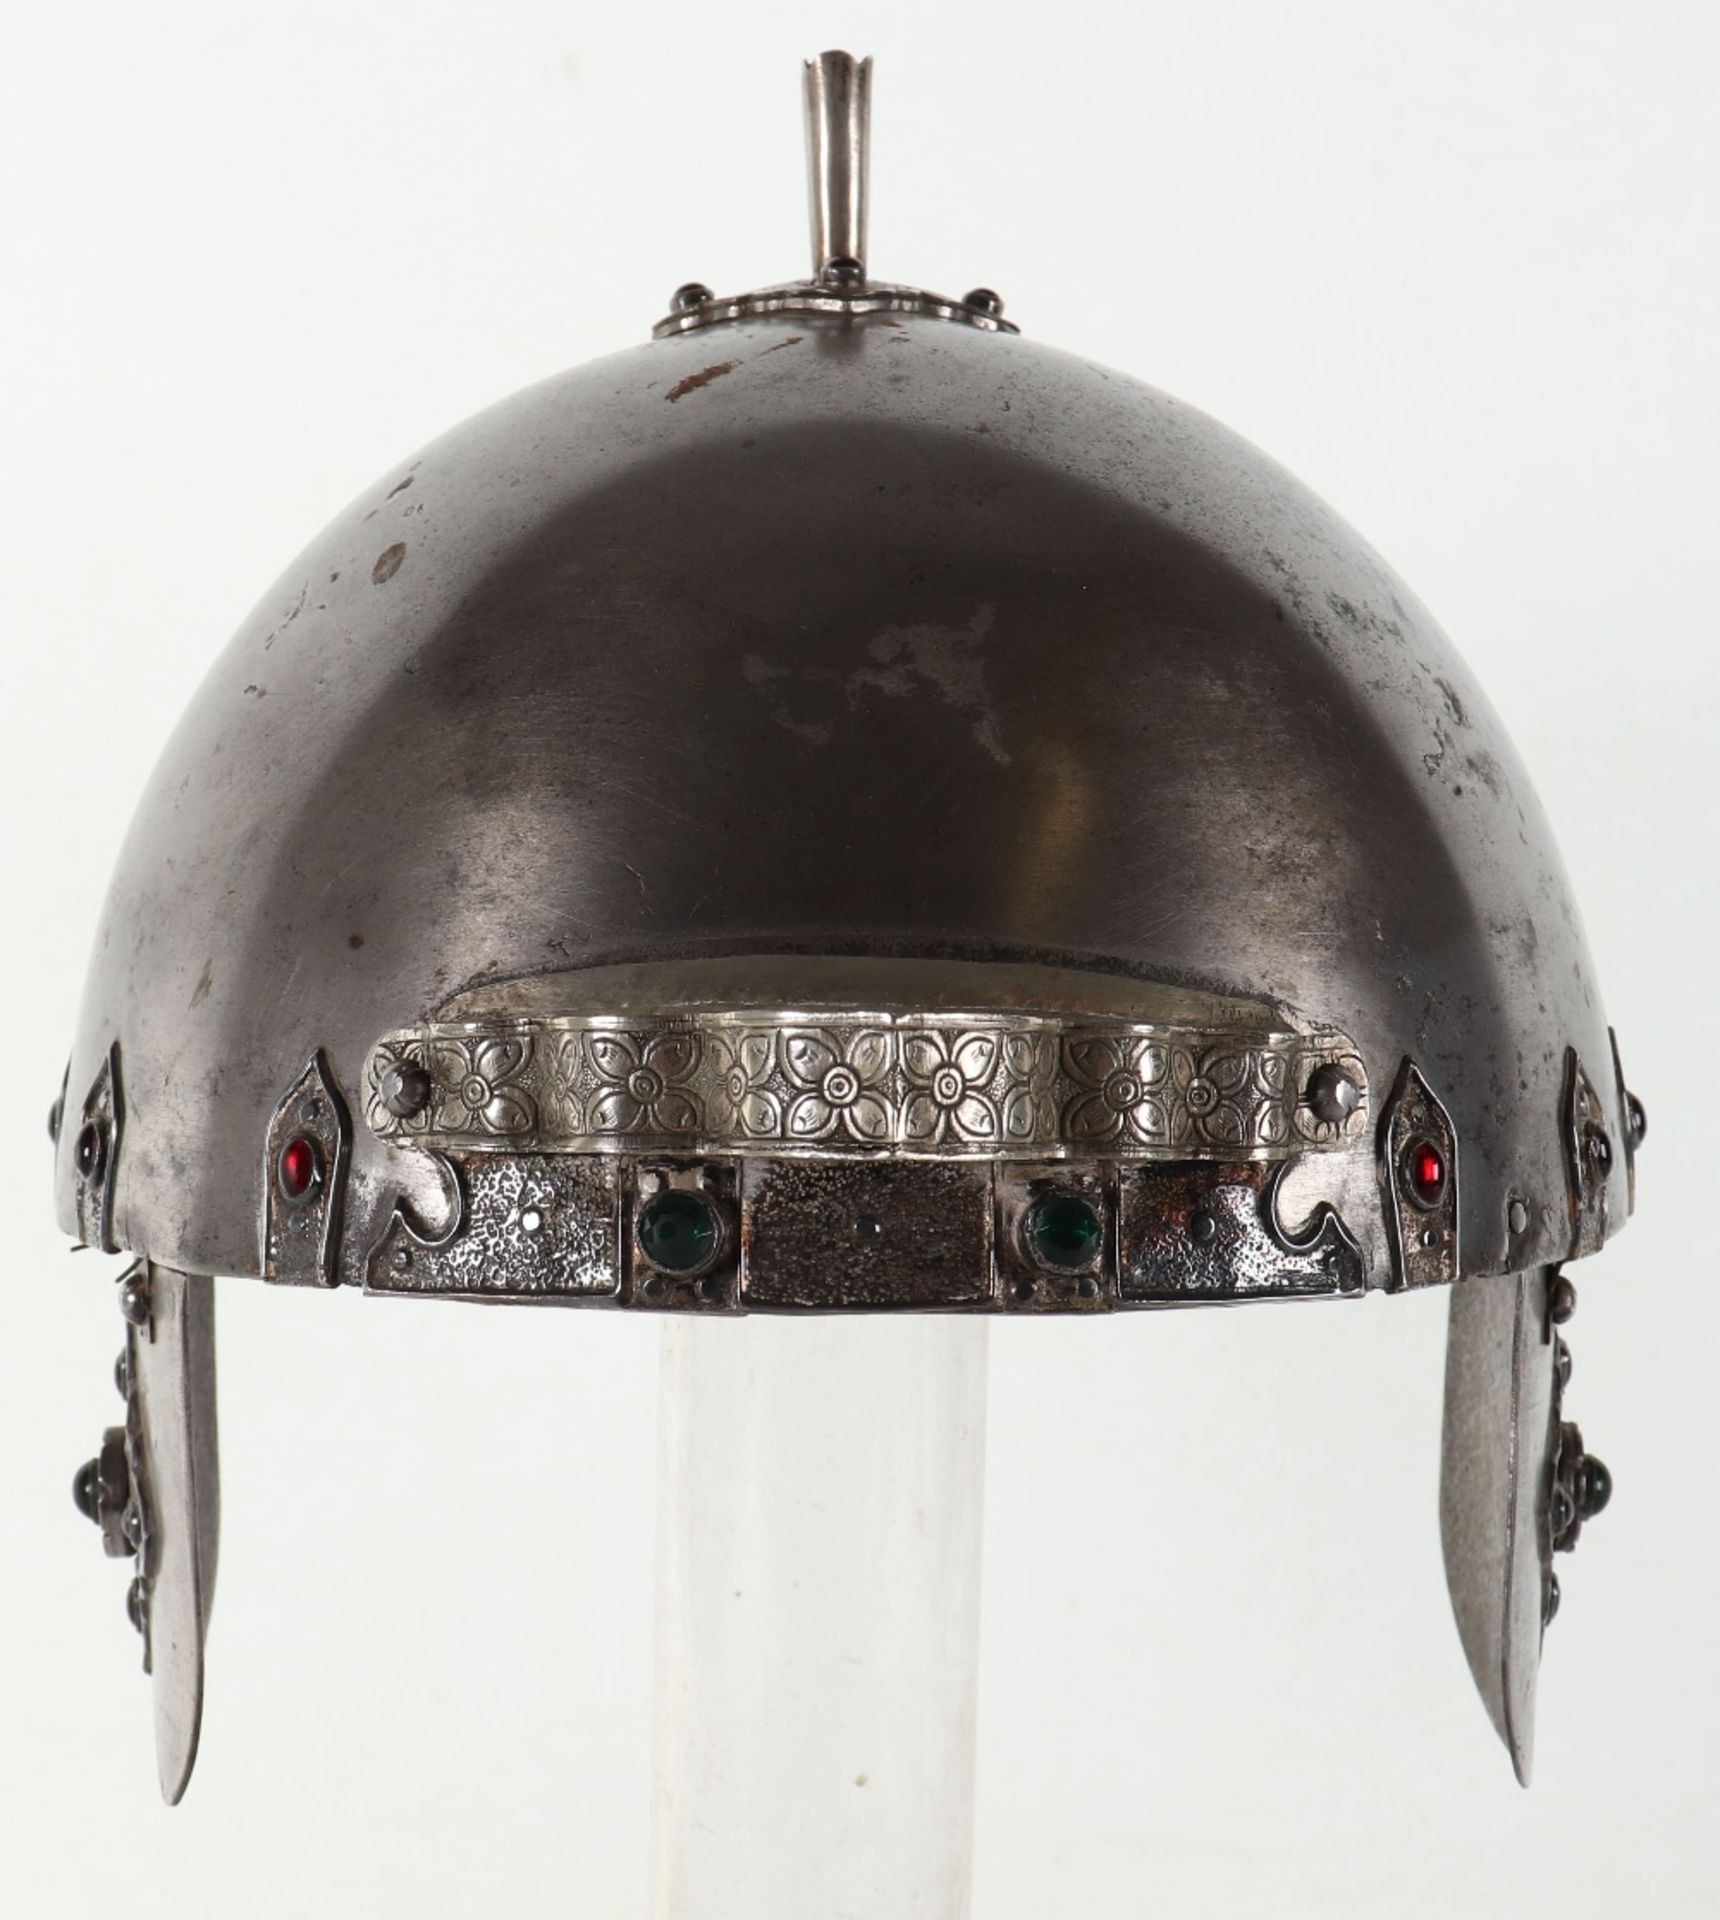 Bhutanese Helmet Possibly 18th or 19th Century - Image 14 of 15